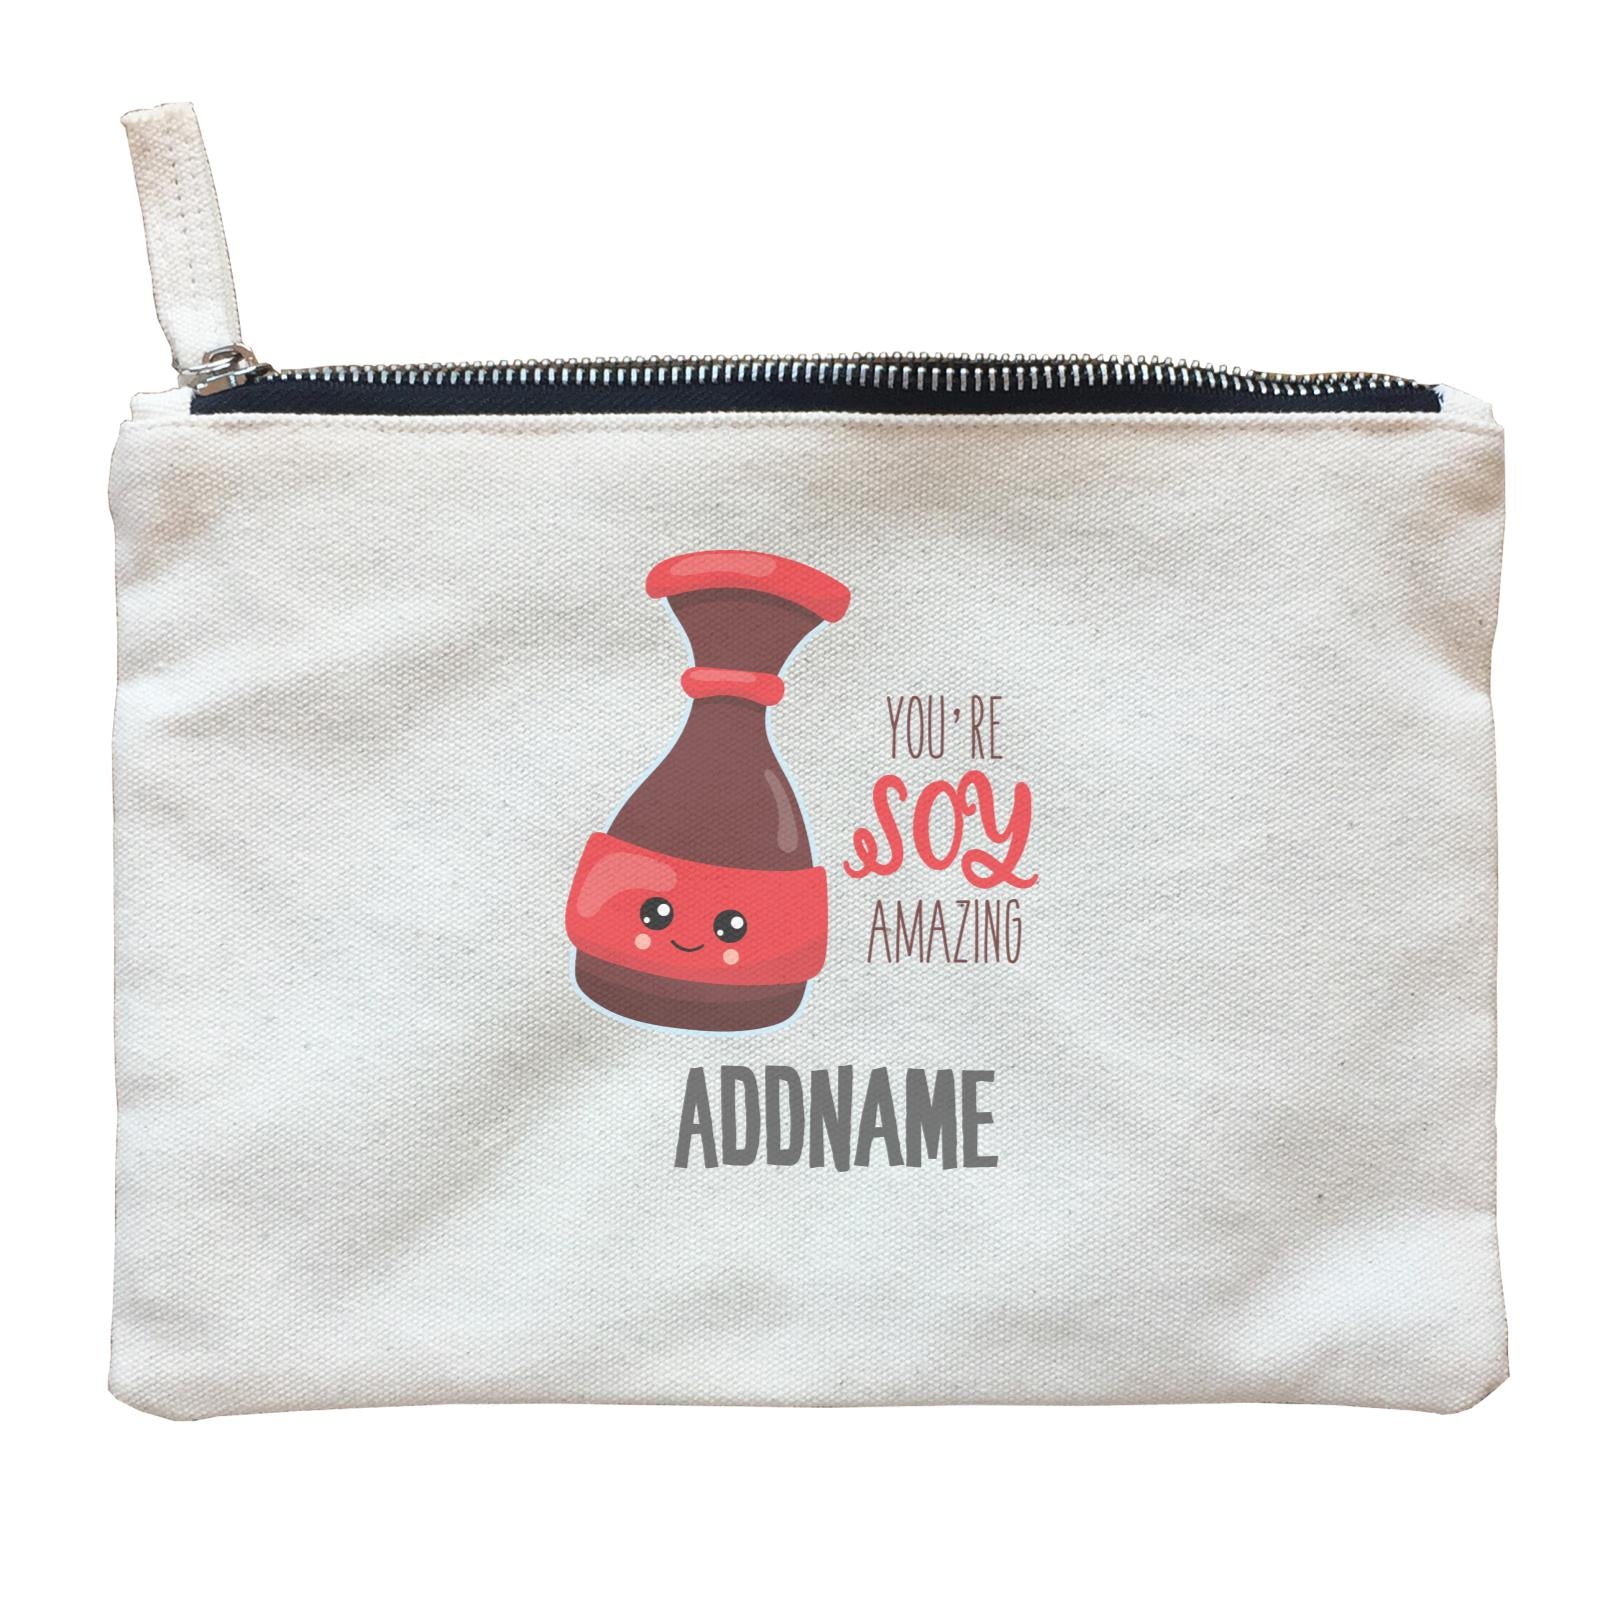 You're Soy Amazing Soy Sauce Addname Zipper Pouch